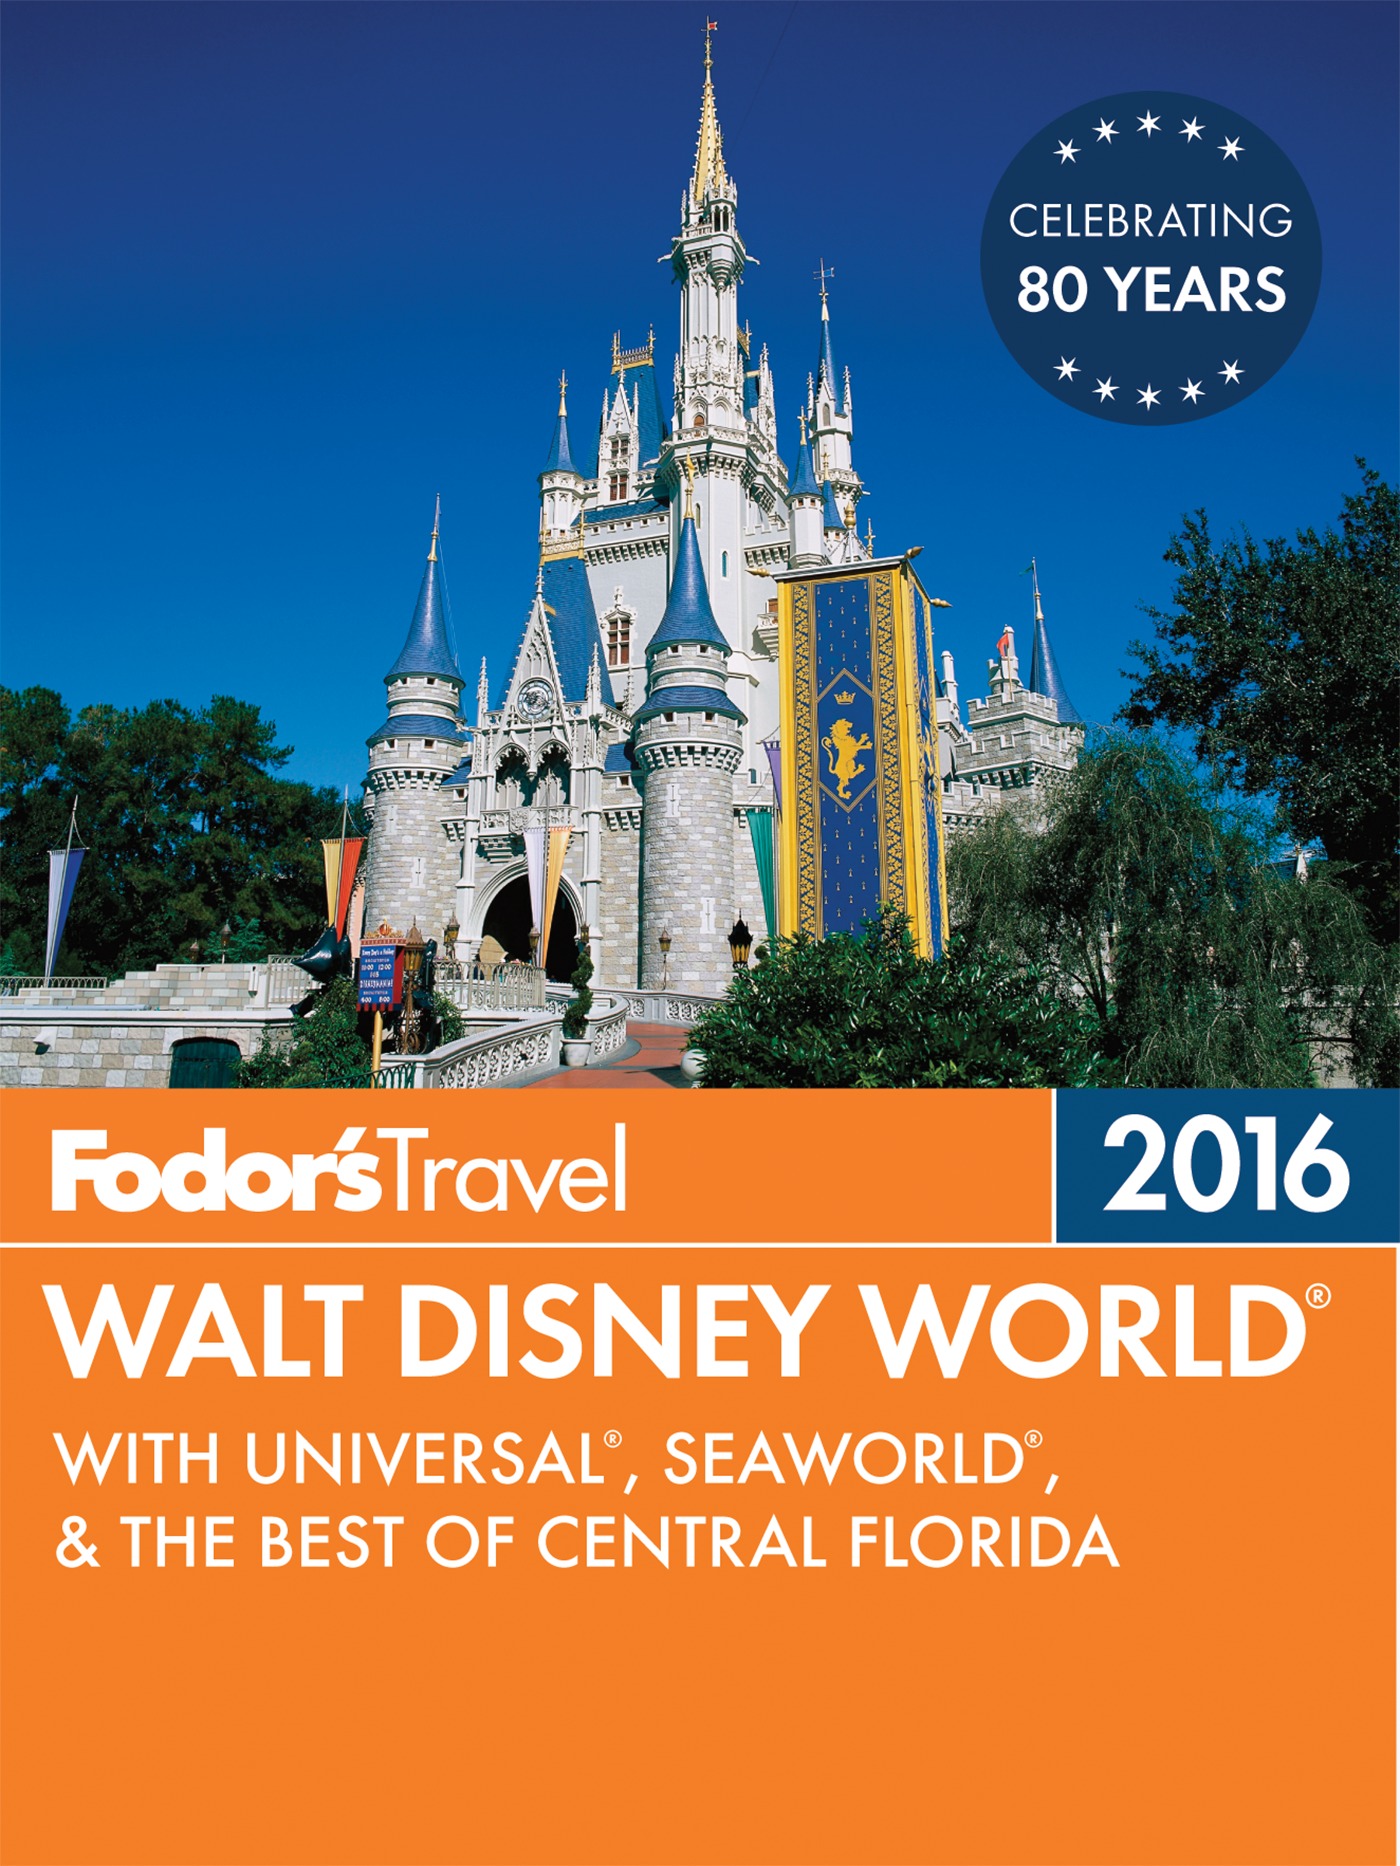 Fodor's Walt Disney World 2016 with Universal & the best of Orlando cover image